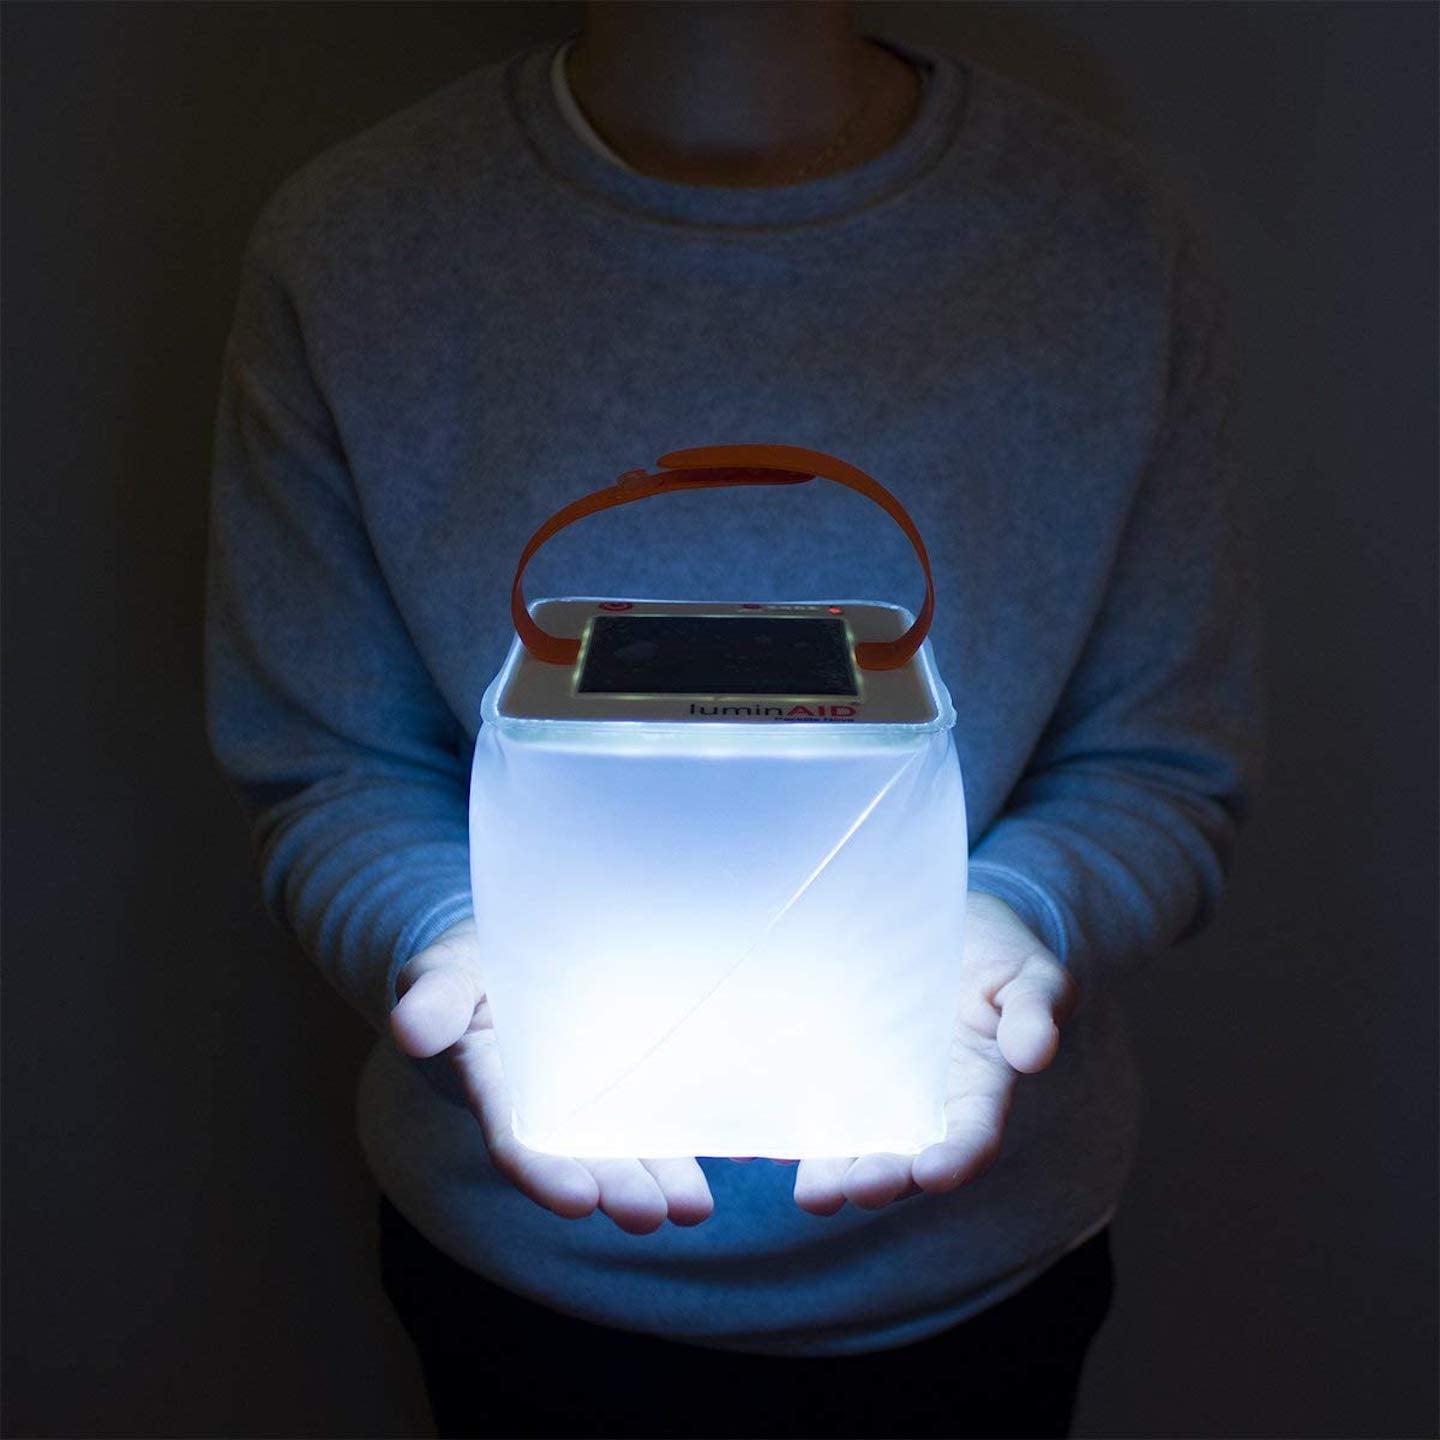 LuminAID Solar Light Featured as one of Shark Tank's Greatest of All Time  Companies